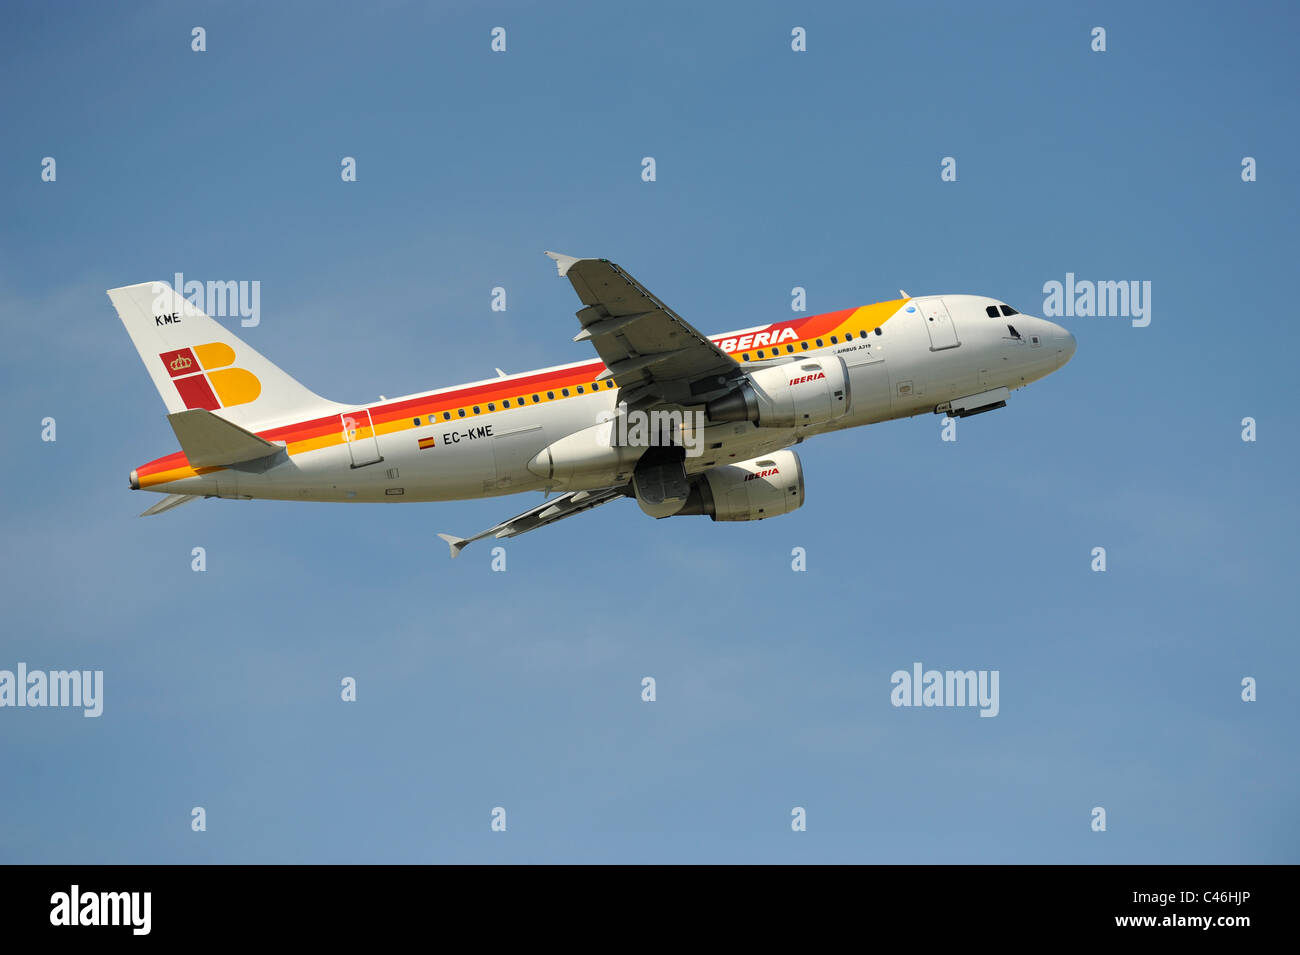 airplane Airbus A319 of spanish airline Iberia at take-off from airport Munich in Germany Stock Photo